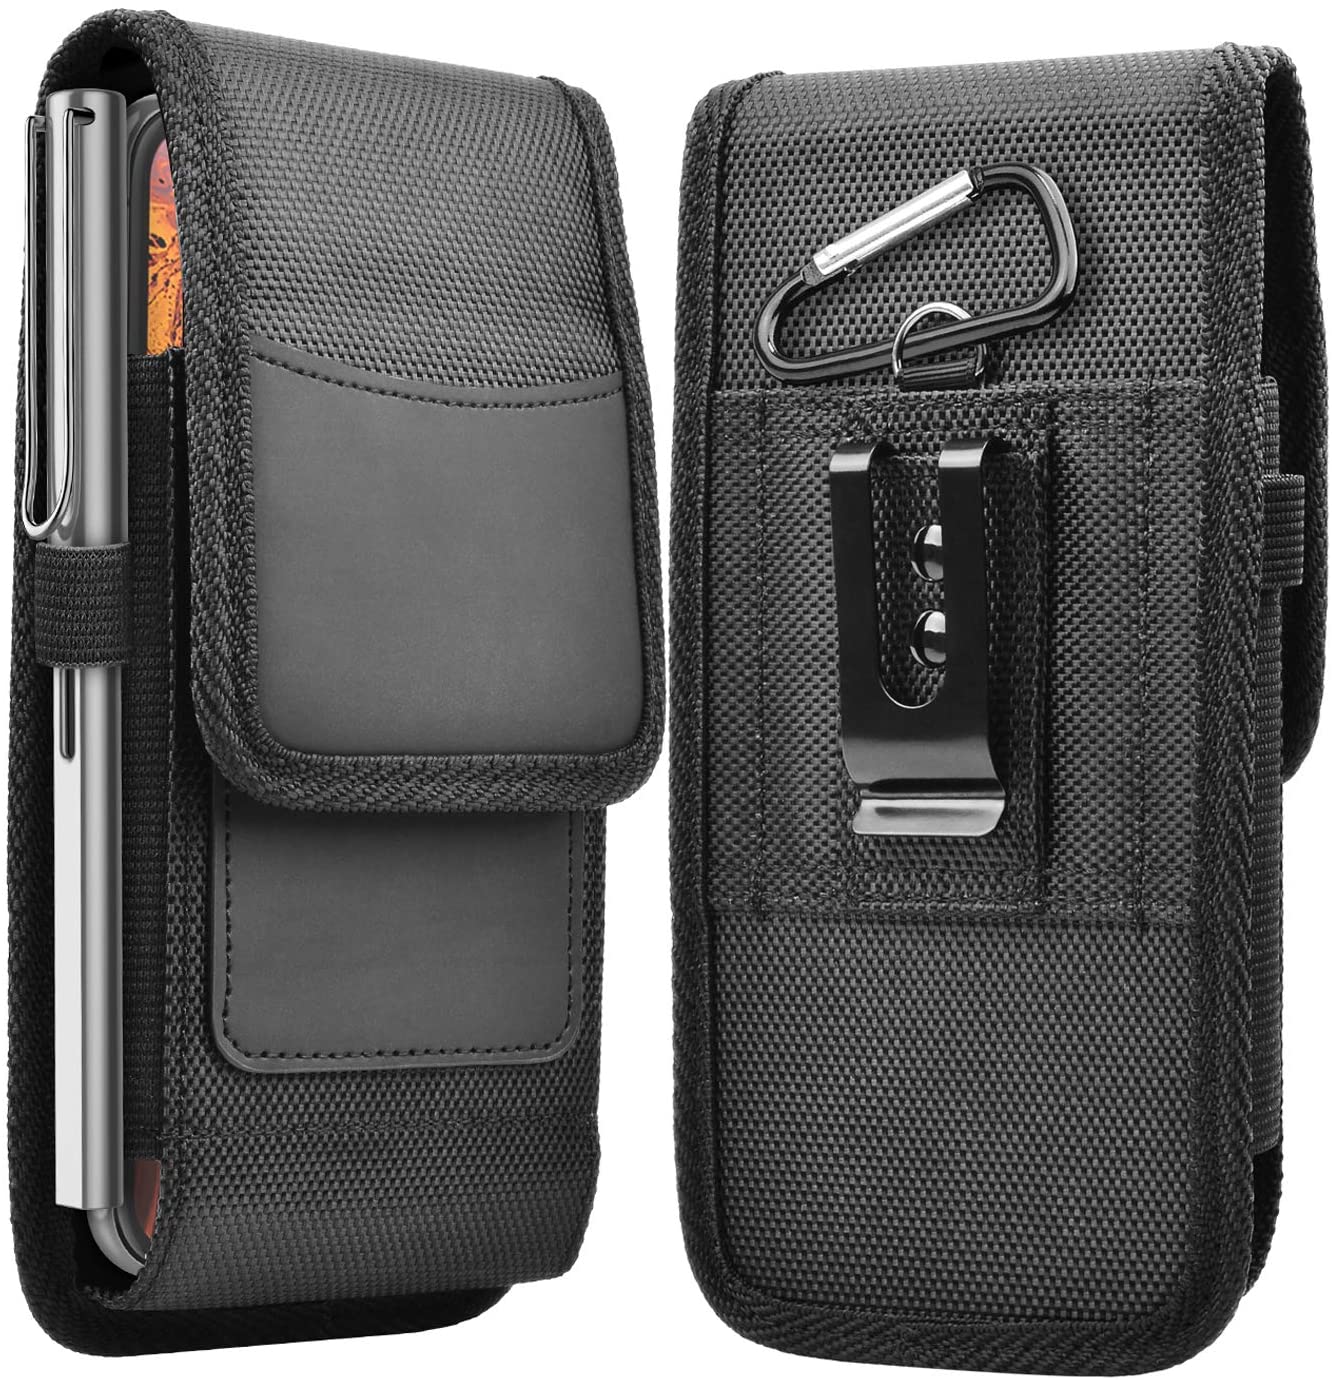 Takfox Stylo 6 Nylon Cell Phone Carrying Pouch with Card Holder and Belt Clip